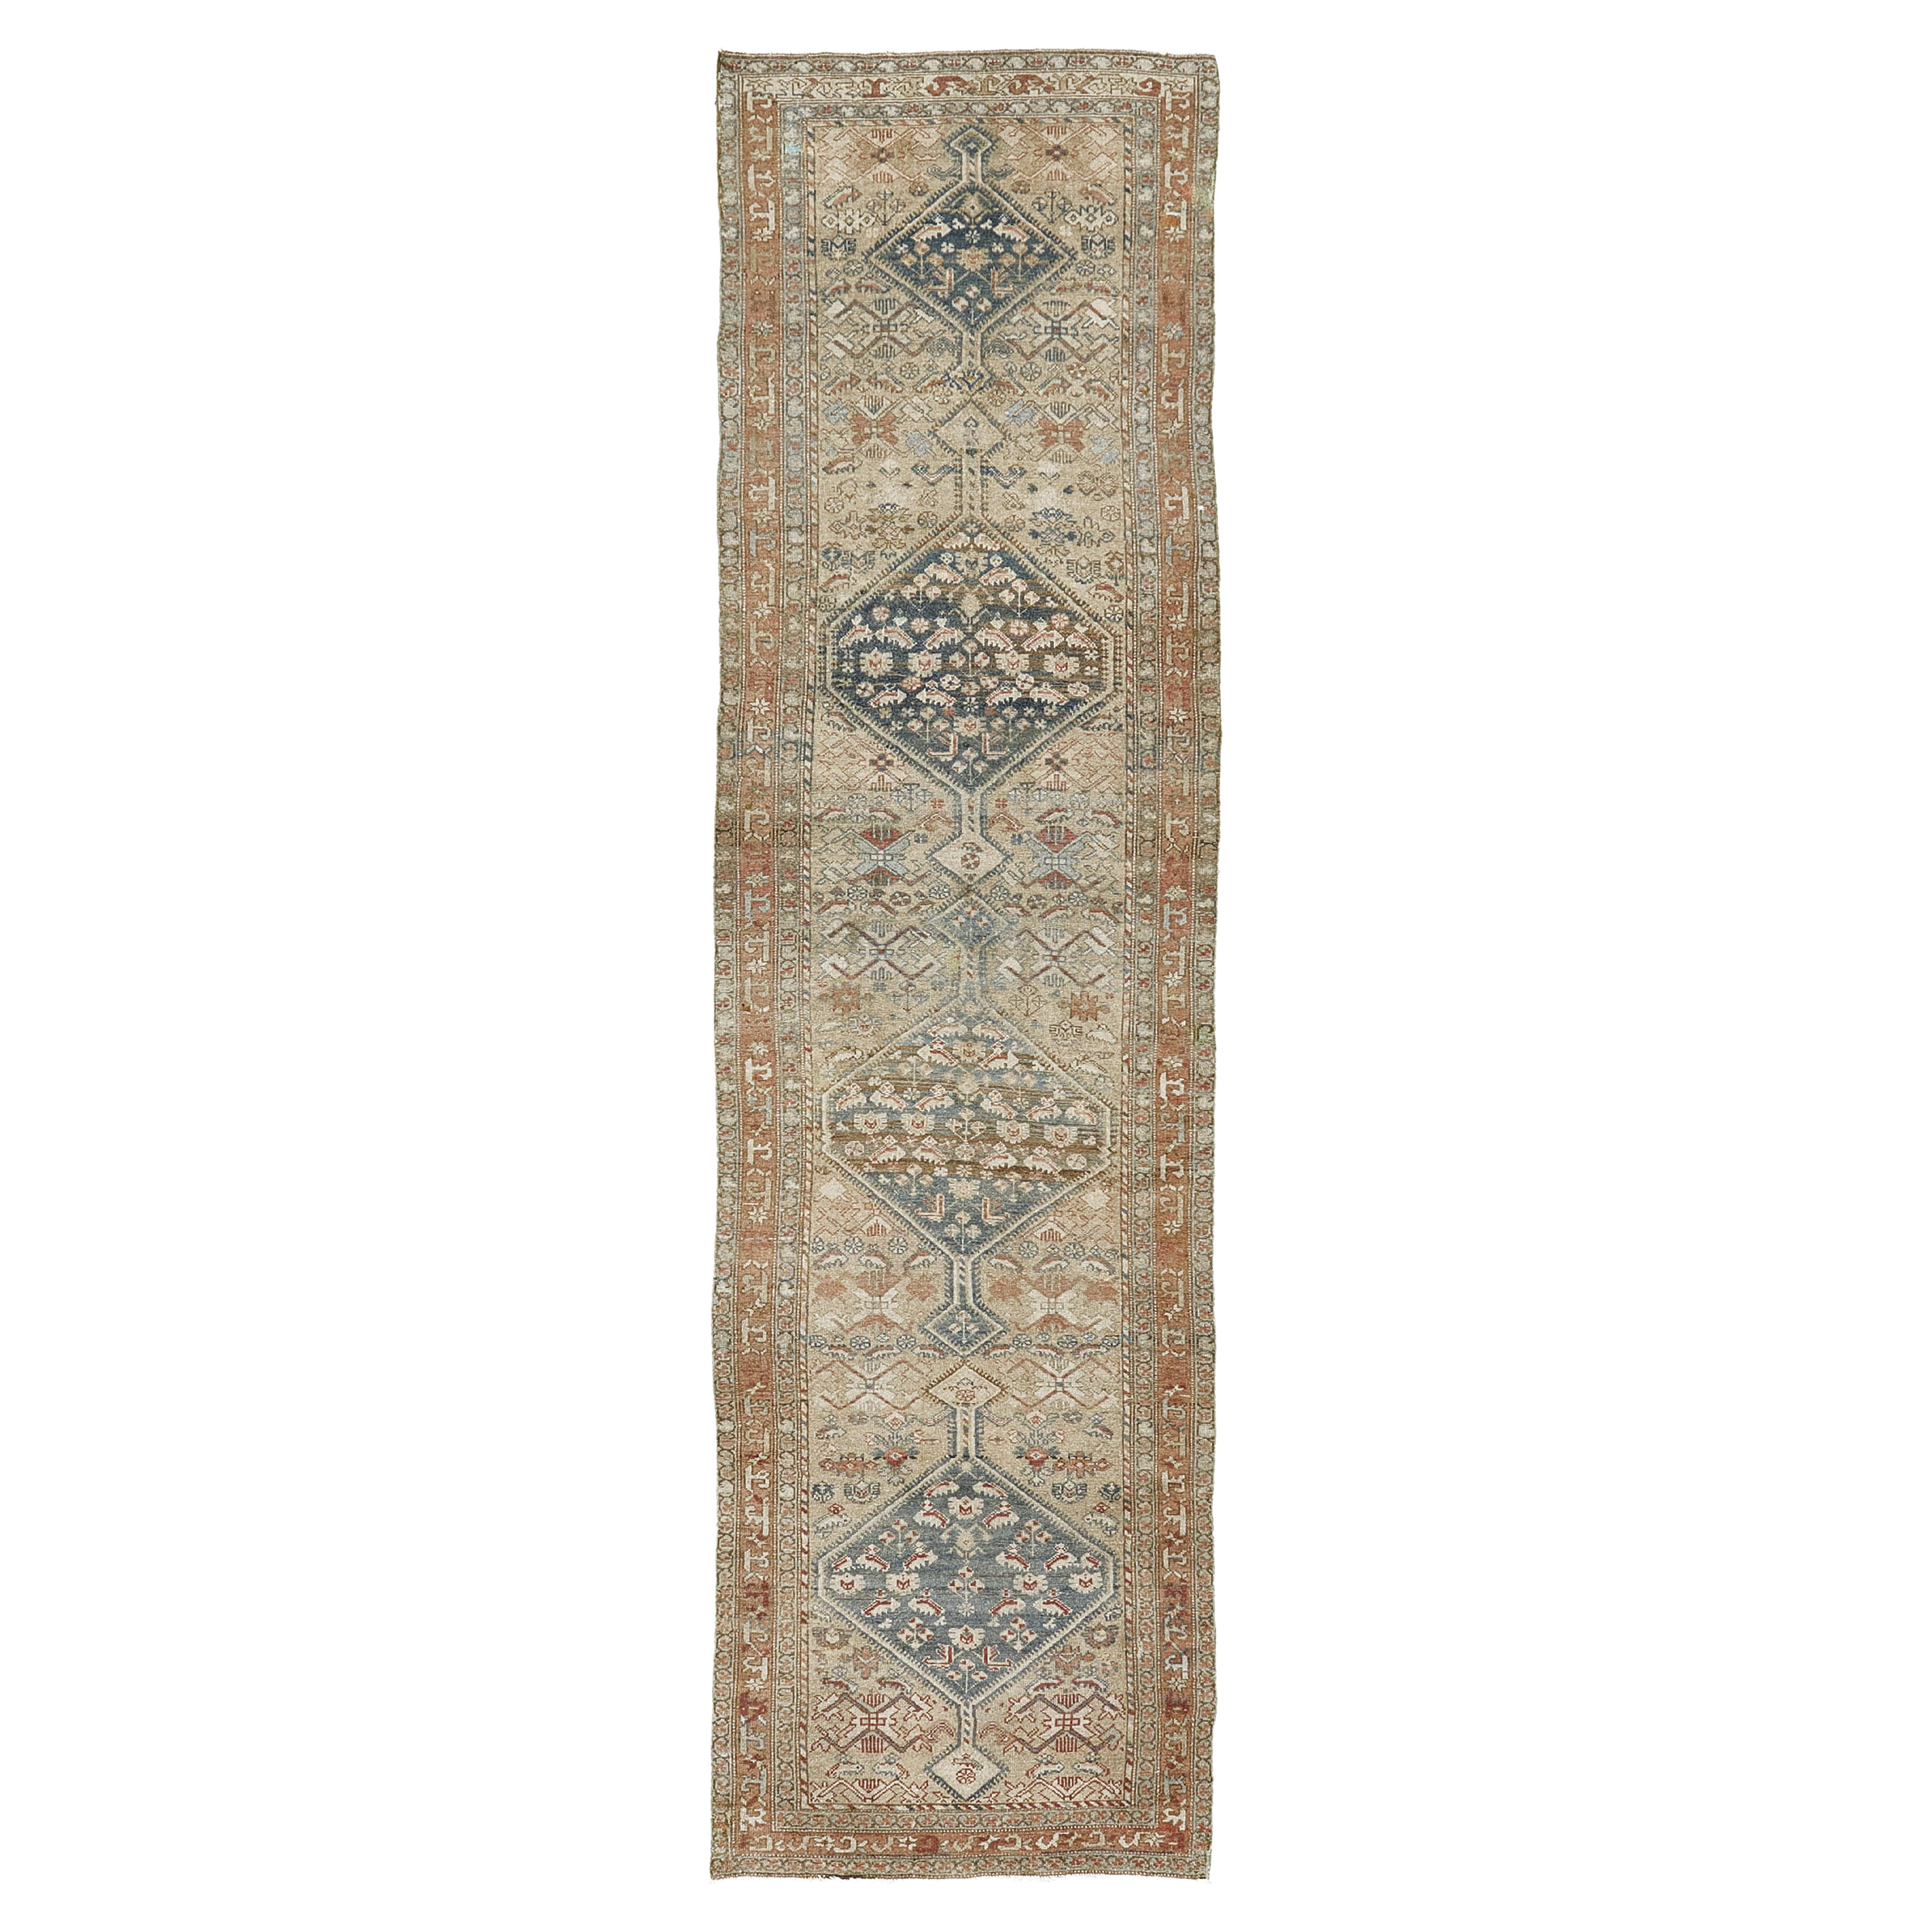 Antique Fine Persian Malayer by Mehraban Rugs